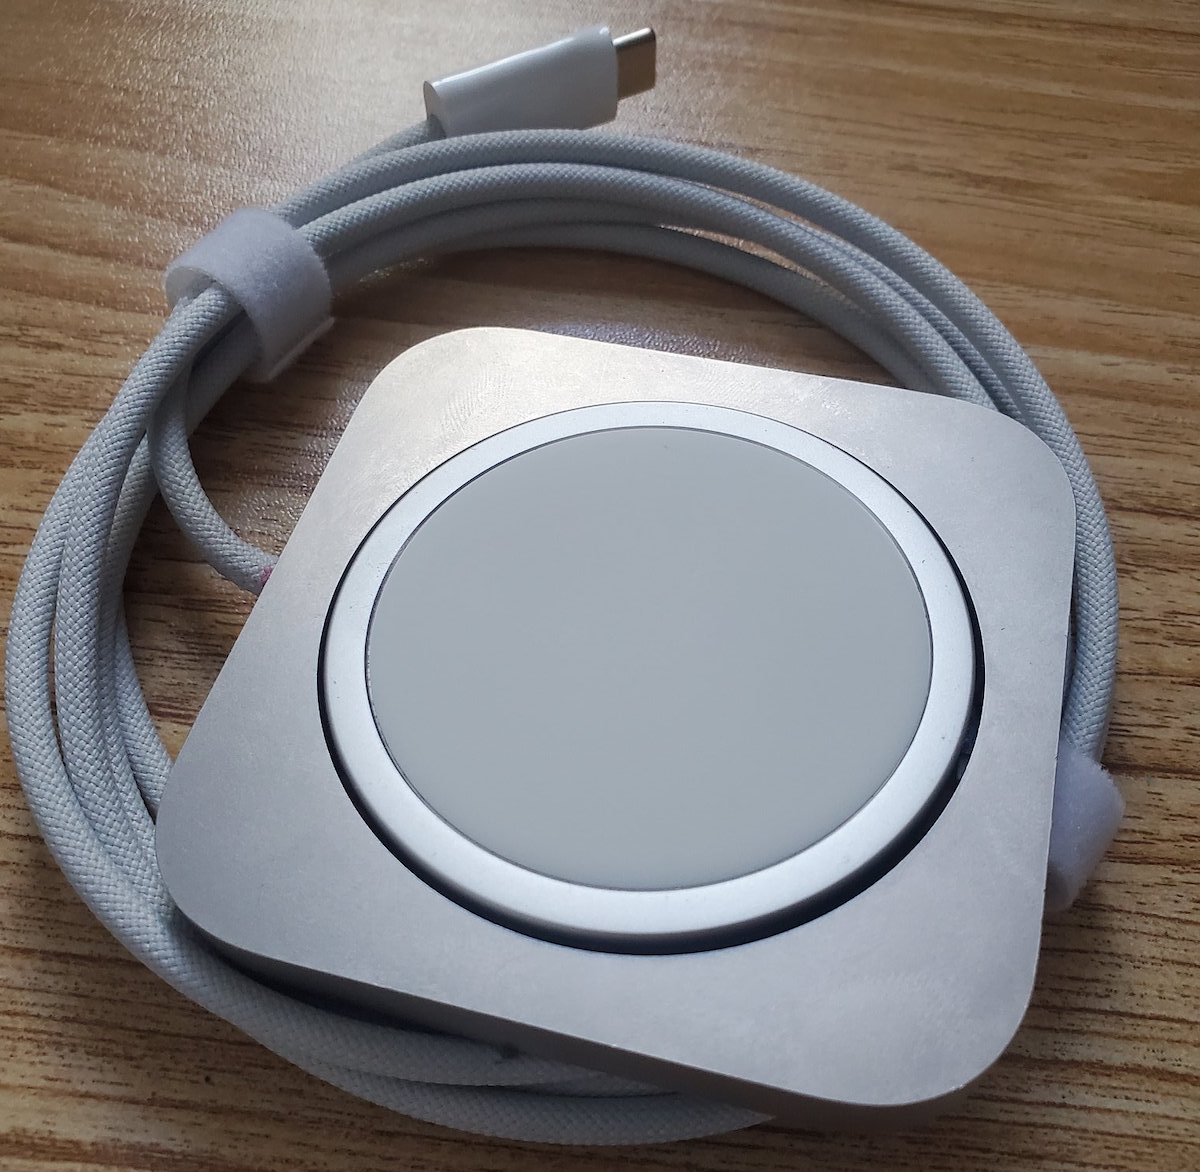 Apple Magic Charger